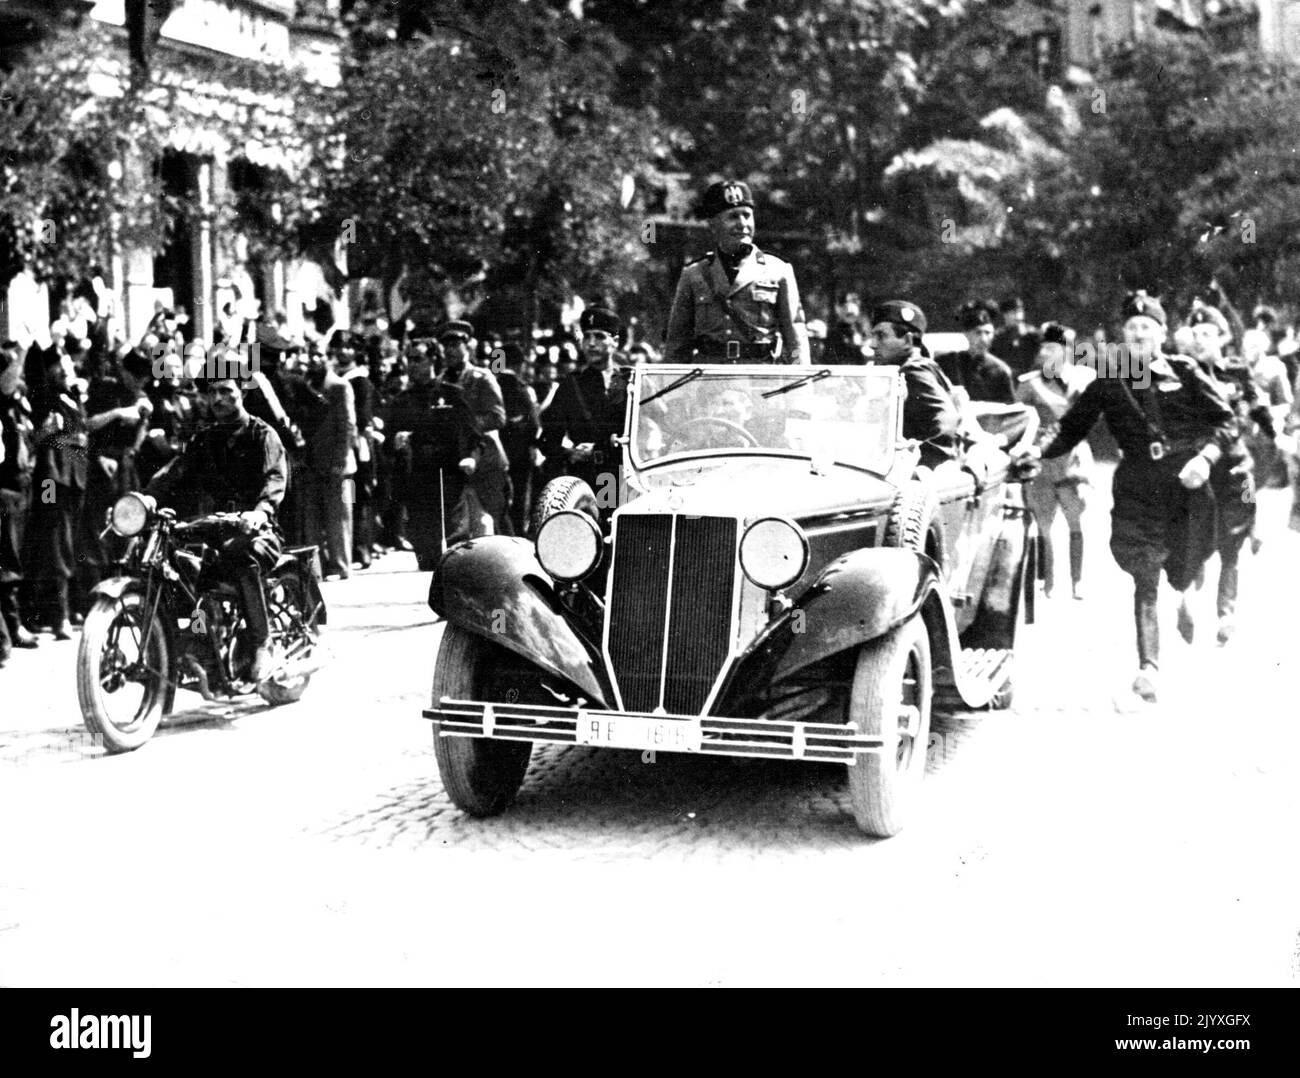 Enthusiastic Crowds Receive Mussolini to Meet His Cabinet Today - Signor Mussolini smiling as he surveyed the crowds, when he drove through the streets of Bolzano, the witness the great Manoeuvres, on Aug. 26. Signor Mussolini was received by cheering fascists as his car went slowly through the streets of Bolzano, on his arrival at the scene of the great Italian Manoeuvres the greatest peace-time Manooeuvres ever held in Europe, and in view of the strained situation between Italy and *****, the eyes of the worls are watching the activities intensely. The Duce is meeting members of his Cabinet Stock Photo